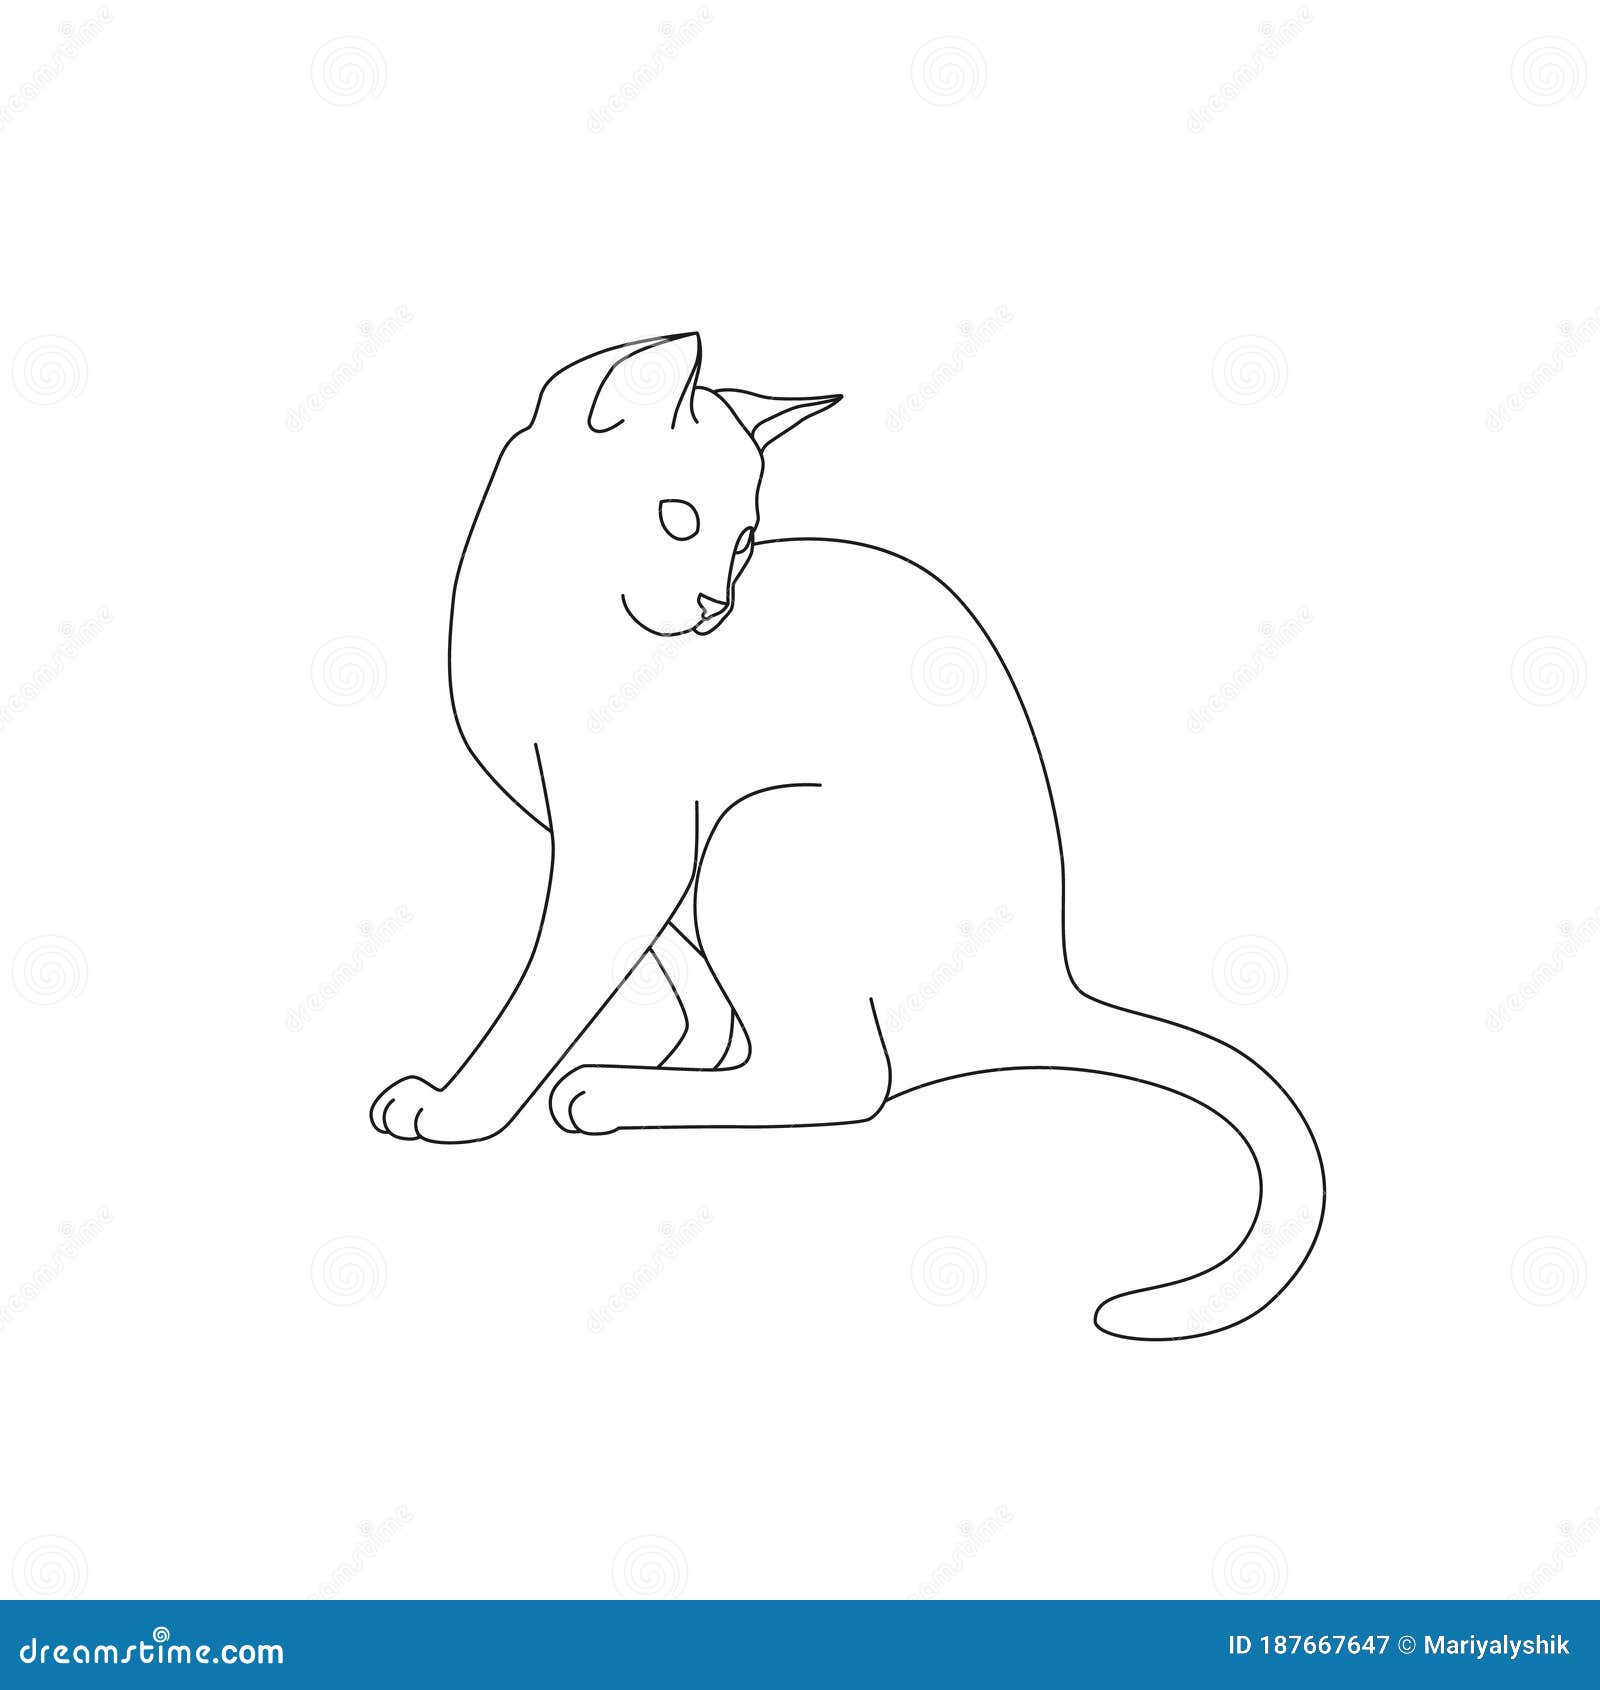 Line Art Cat Silhouette Illustration Isolated on White Background.  Minimalist Tattoo with Animal Stock Vector - Illustration of beautiful,  outline: 187667647